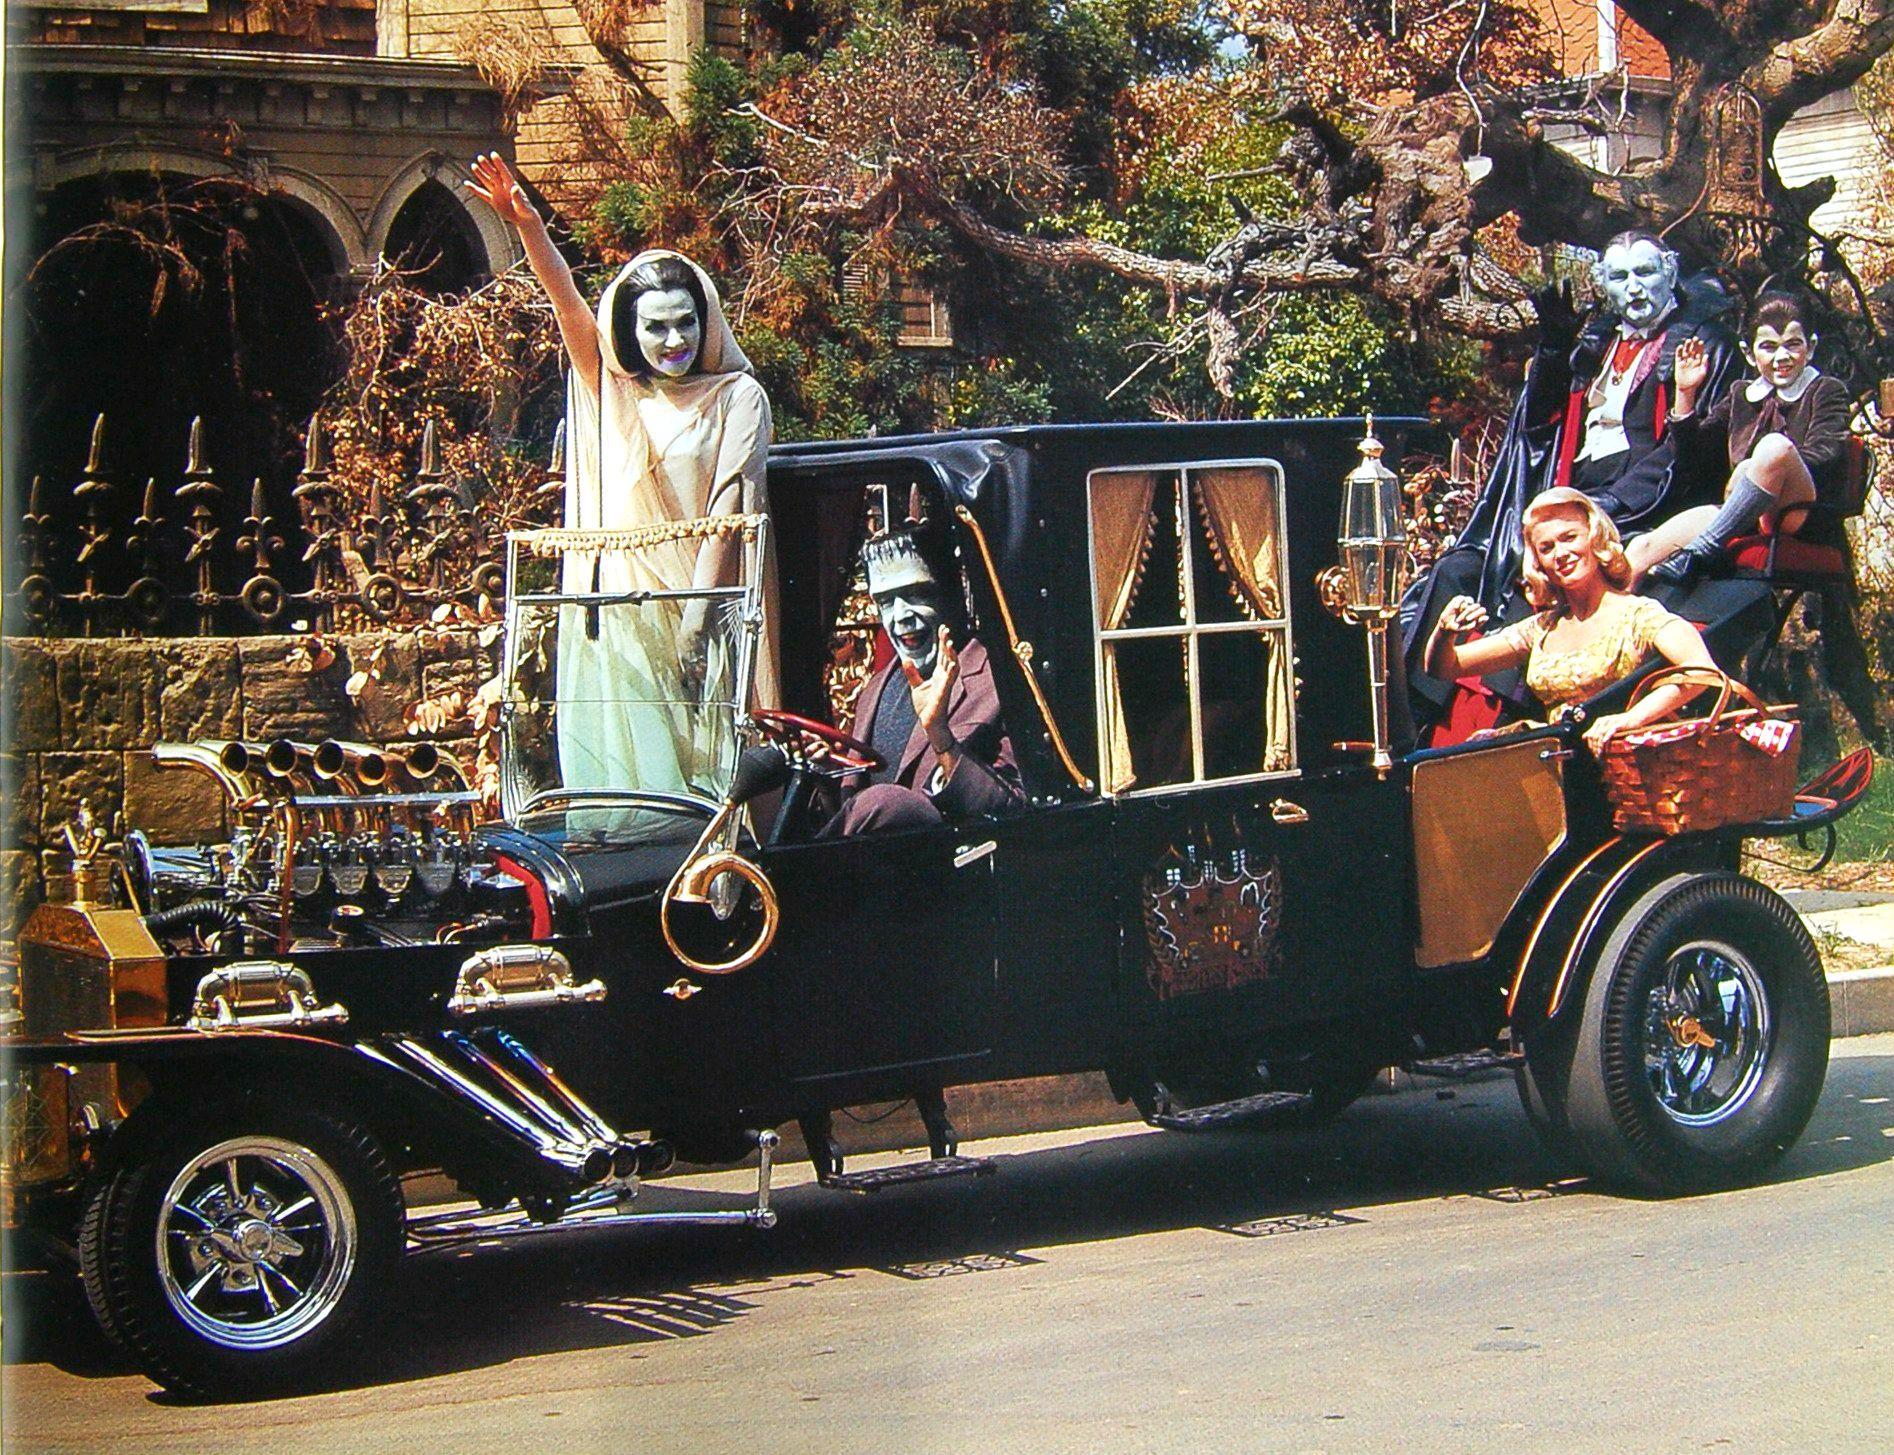 Munsters' Halloween Wallpaper and Background Imagex1455